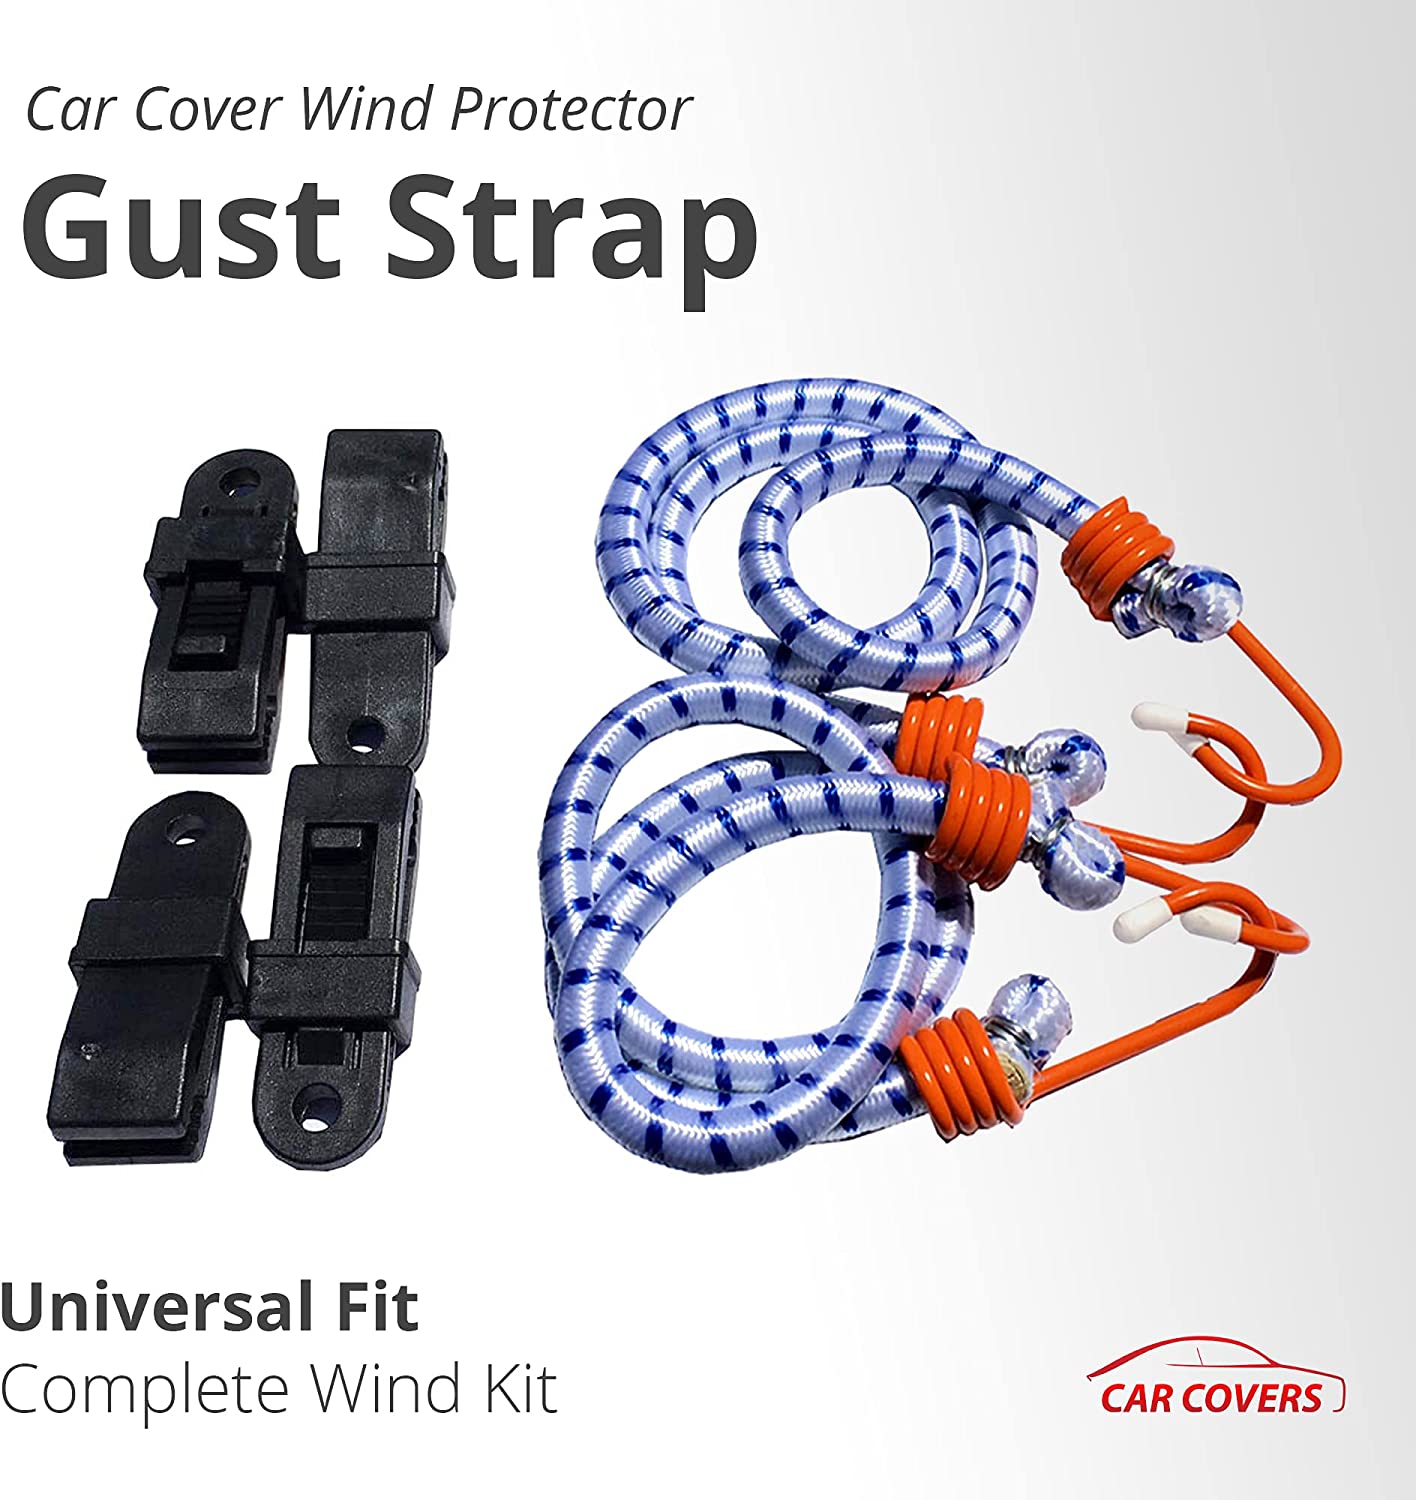 Gust Strap Car Cover Wind Protector - Protect Your Car Cover from Blowing Off in High Winds - Works with Most Cars, SUVs, Trucks, Vans, and More! Universal Fit. Complete Wind Kit. - (For 8 piece(s))